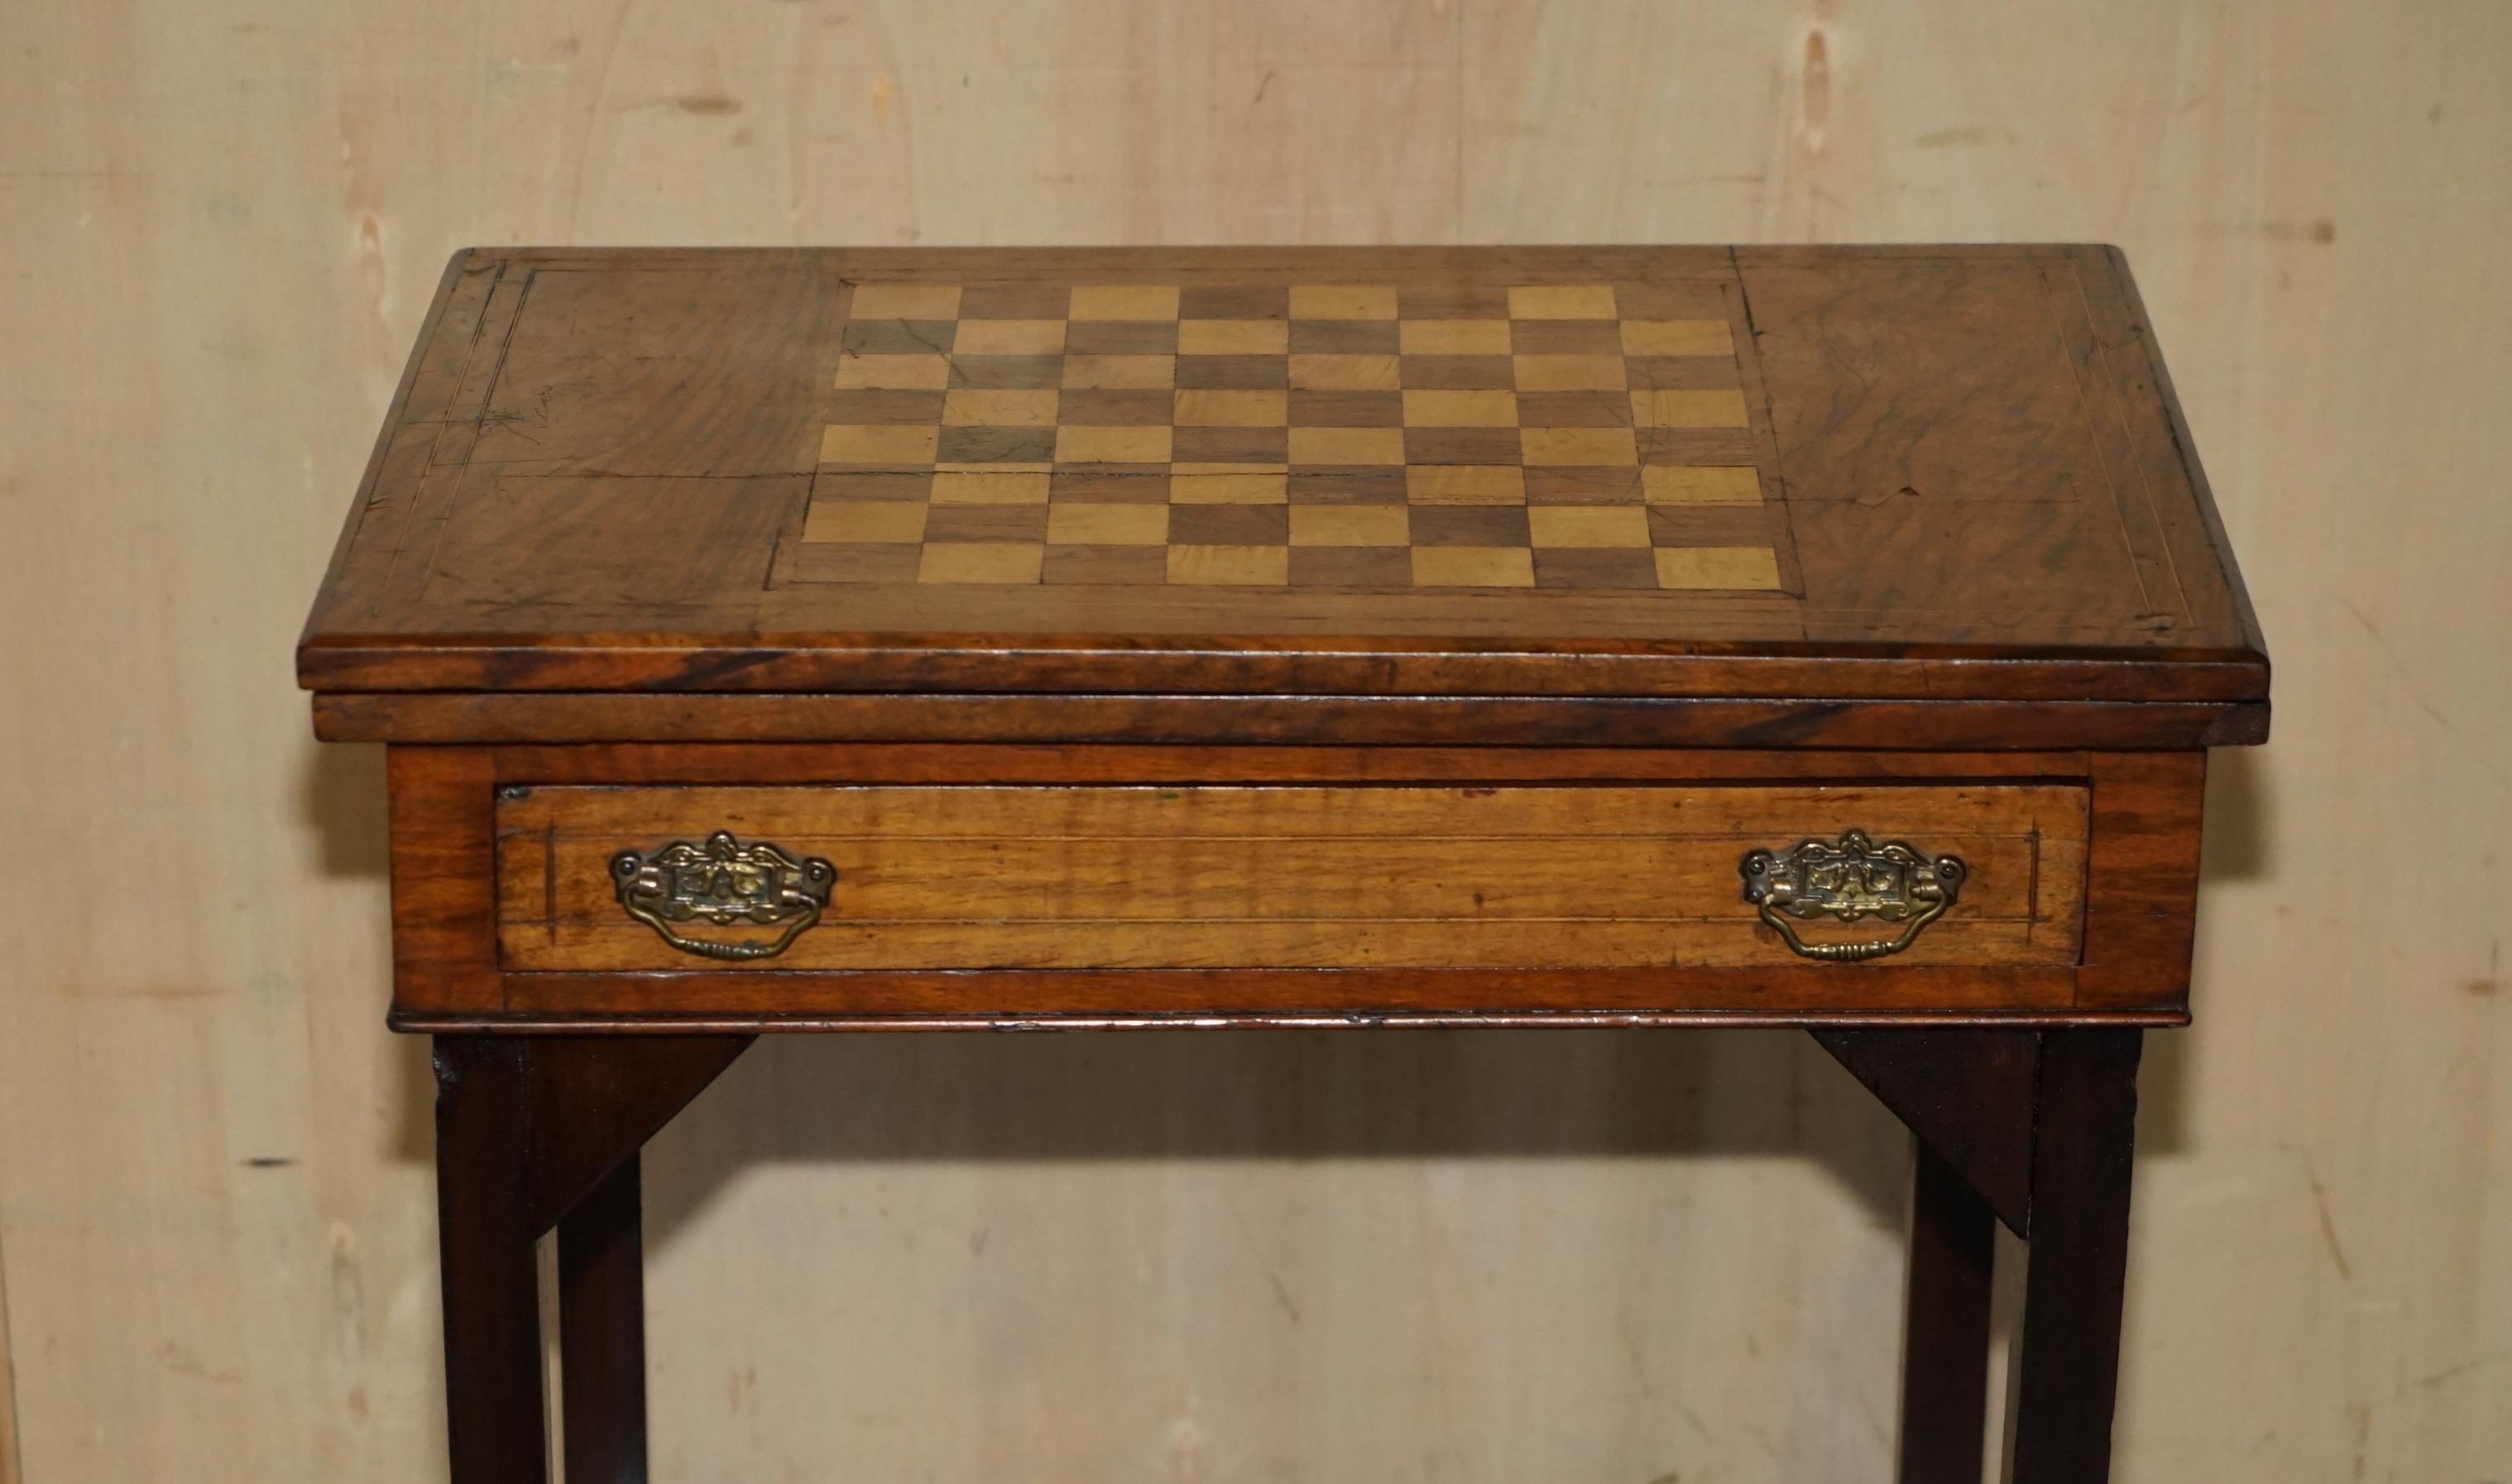 High Victorian EXQUISITE WALNUT SATINWOOD & HARDWOOD ANTIQUE ViCTORIAN CHESSBOARD GAMES TABLE For Sale